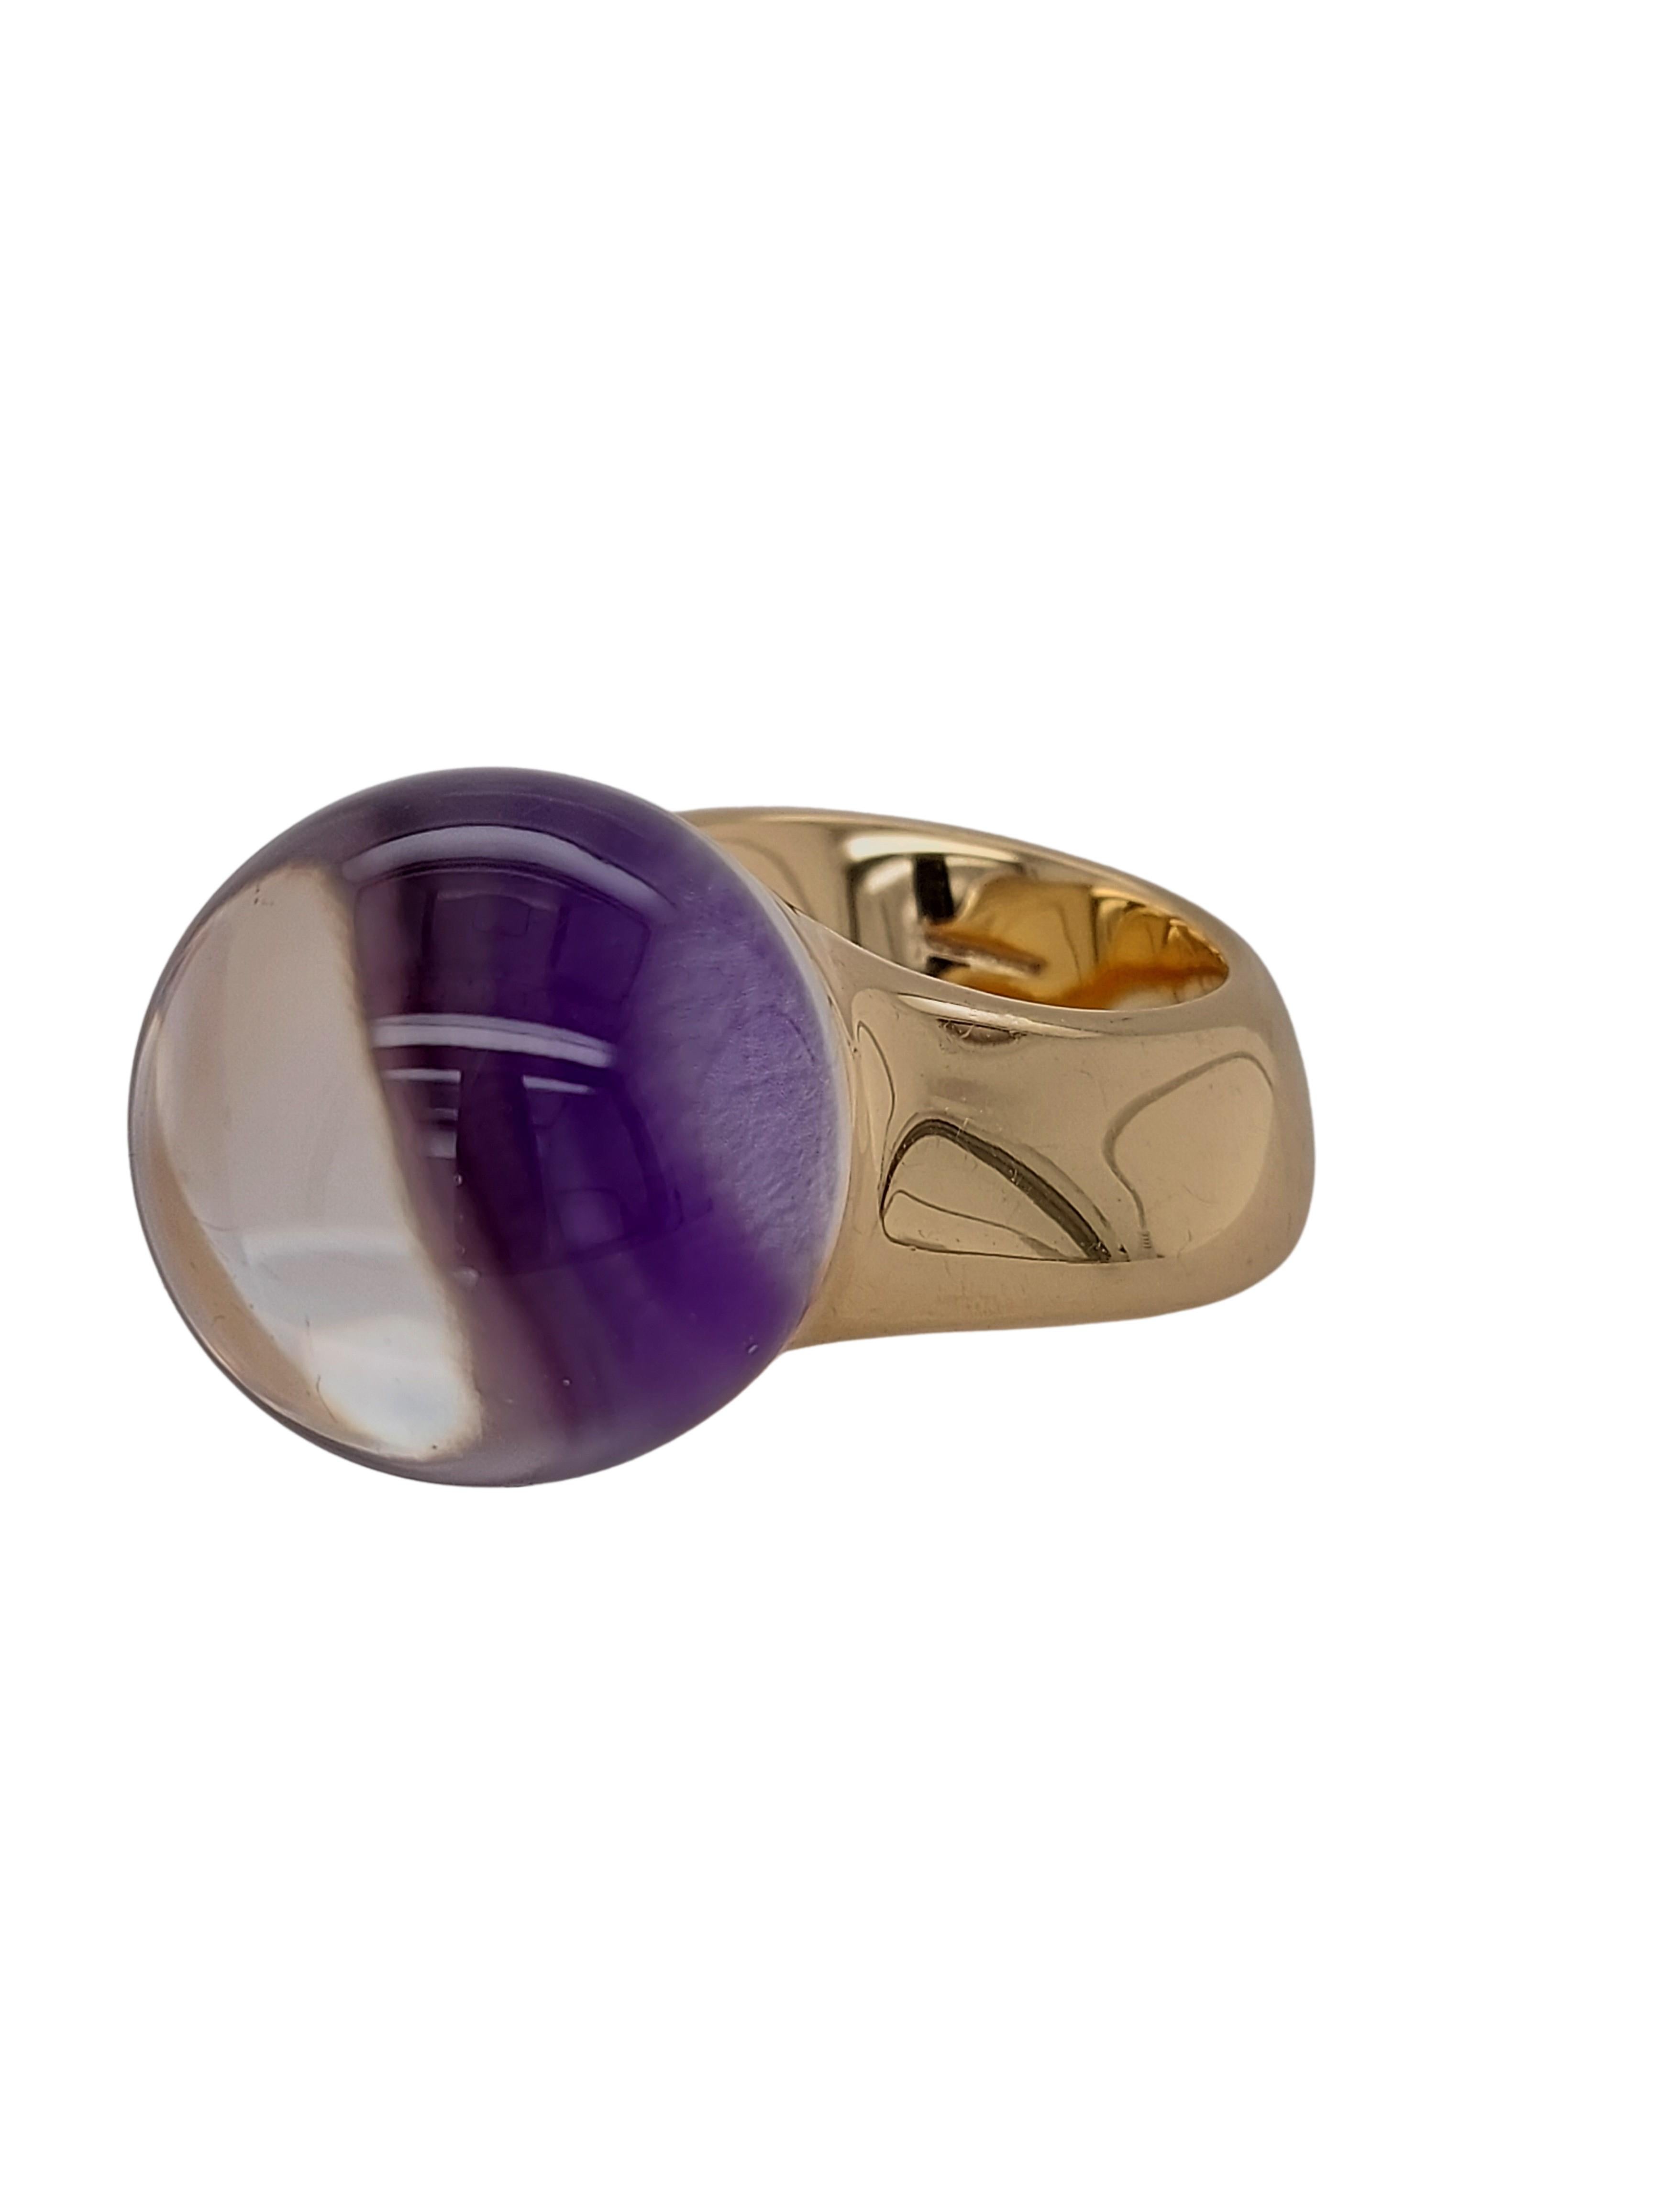 Wonderfully designed Vhernier - Re Sole 18kt Gold Ring with Purple Sugilite and Rock crystal stone

Can be bought together with LU1752212615682 and be worn together.

Stone: Sugilite and rock crystal, Diameter 21 mm 
 
Material: 18kt pink gold
